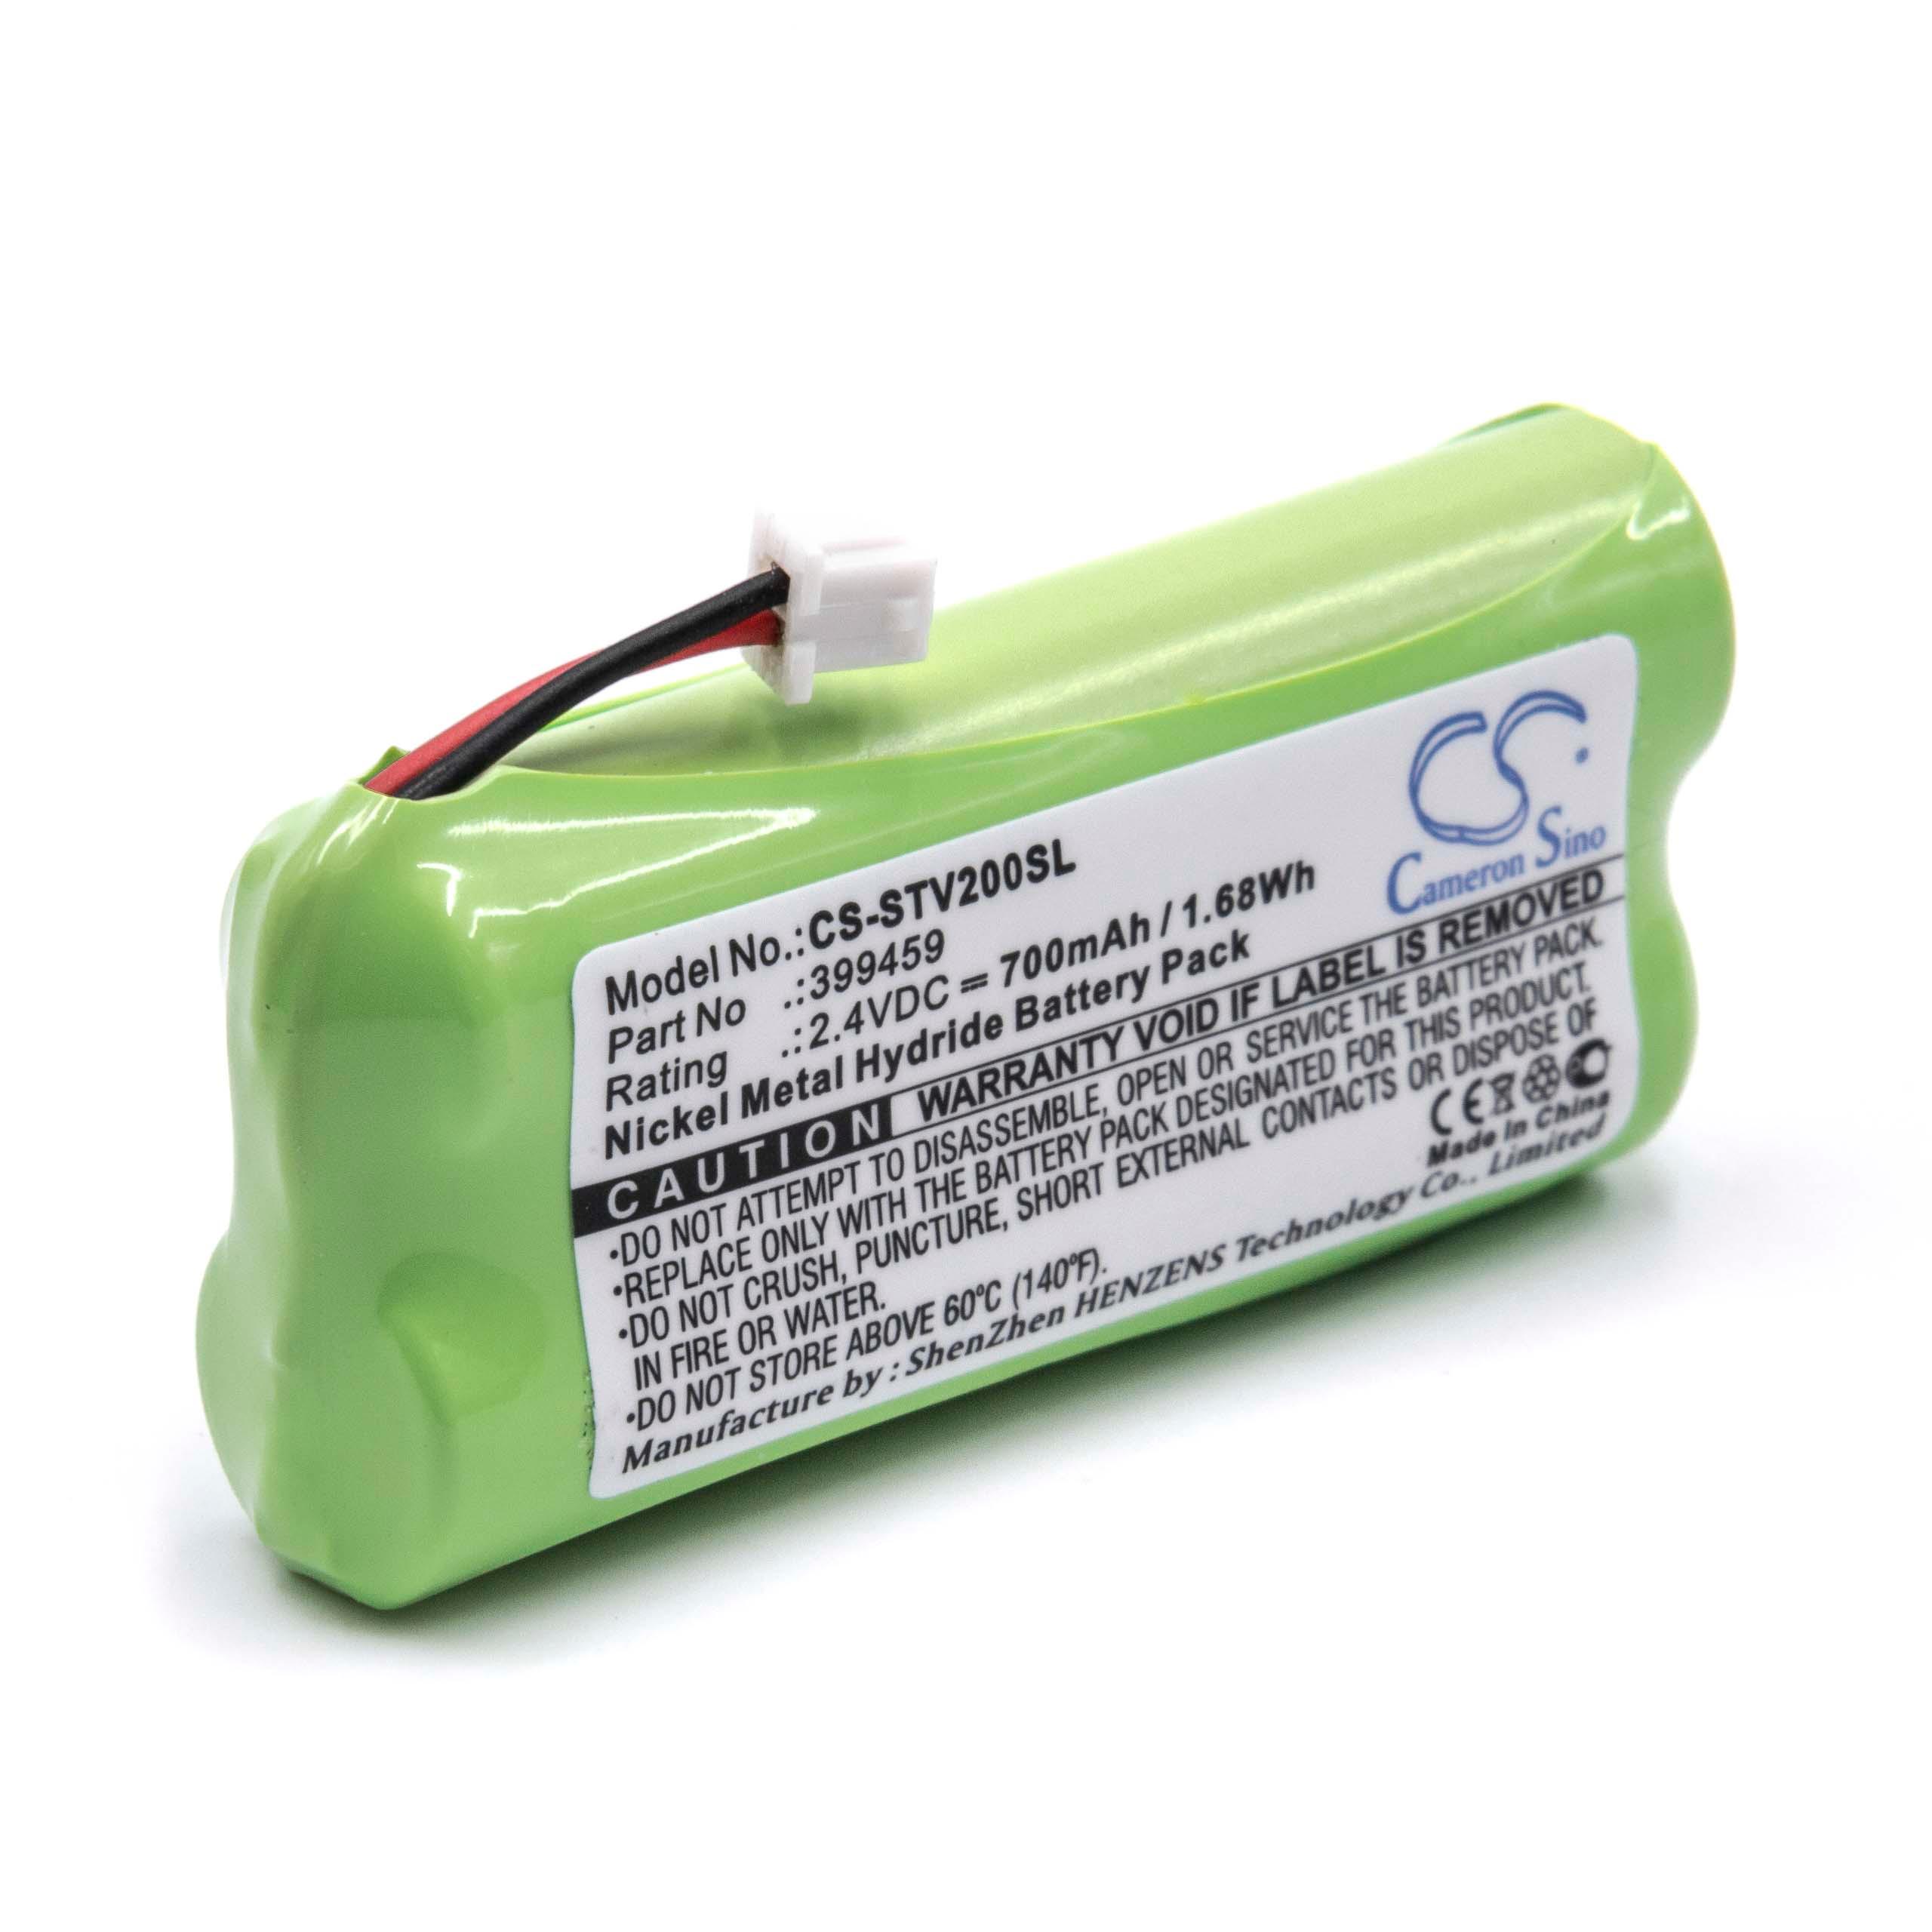 Guitar Transmitter Battery Replacement for Stageclix 399459 - 700mAh, 2.4V